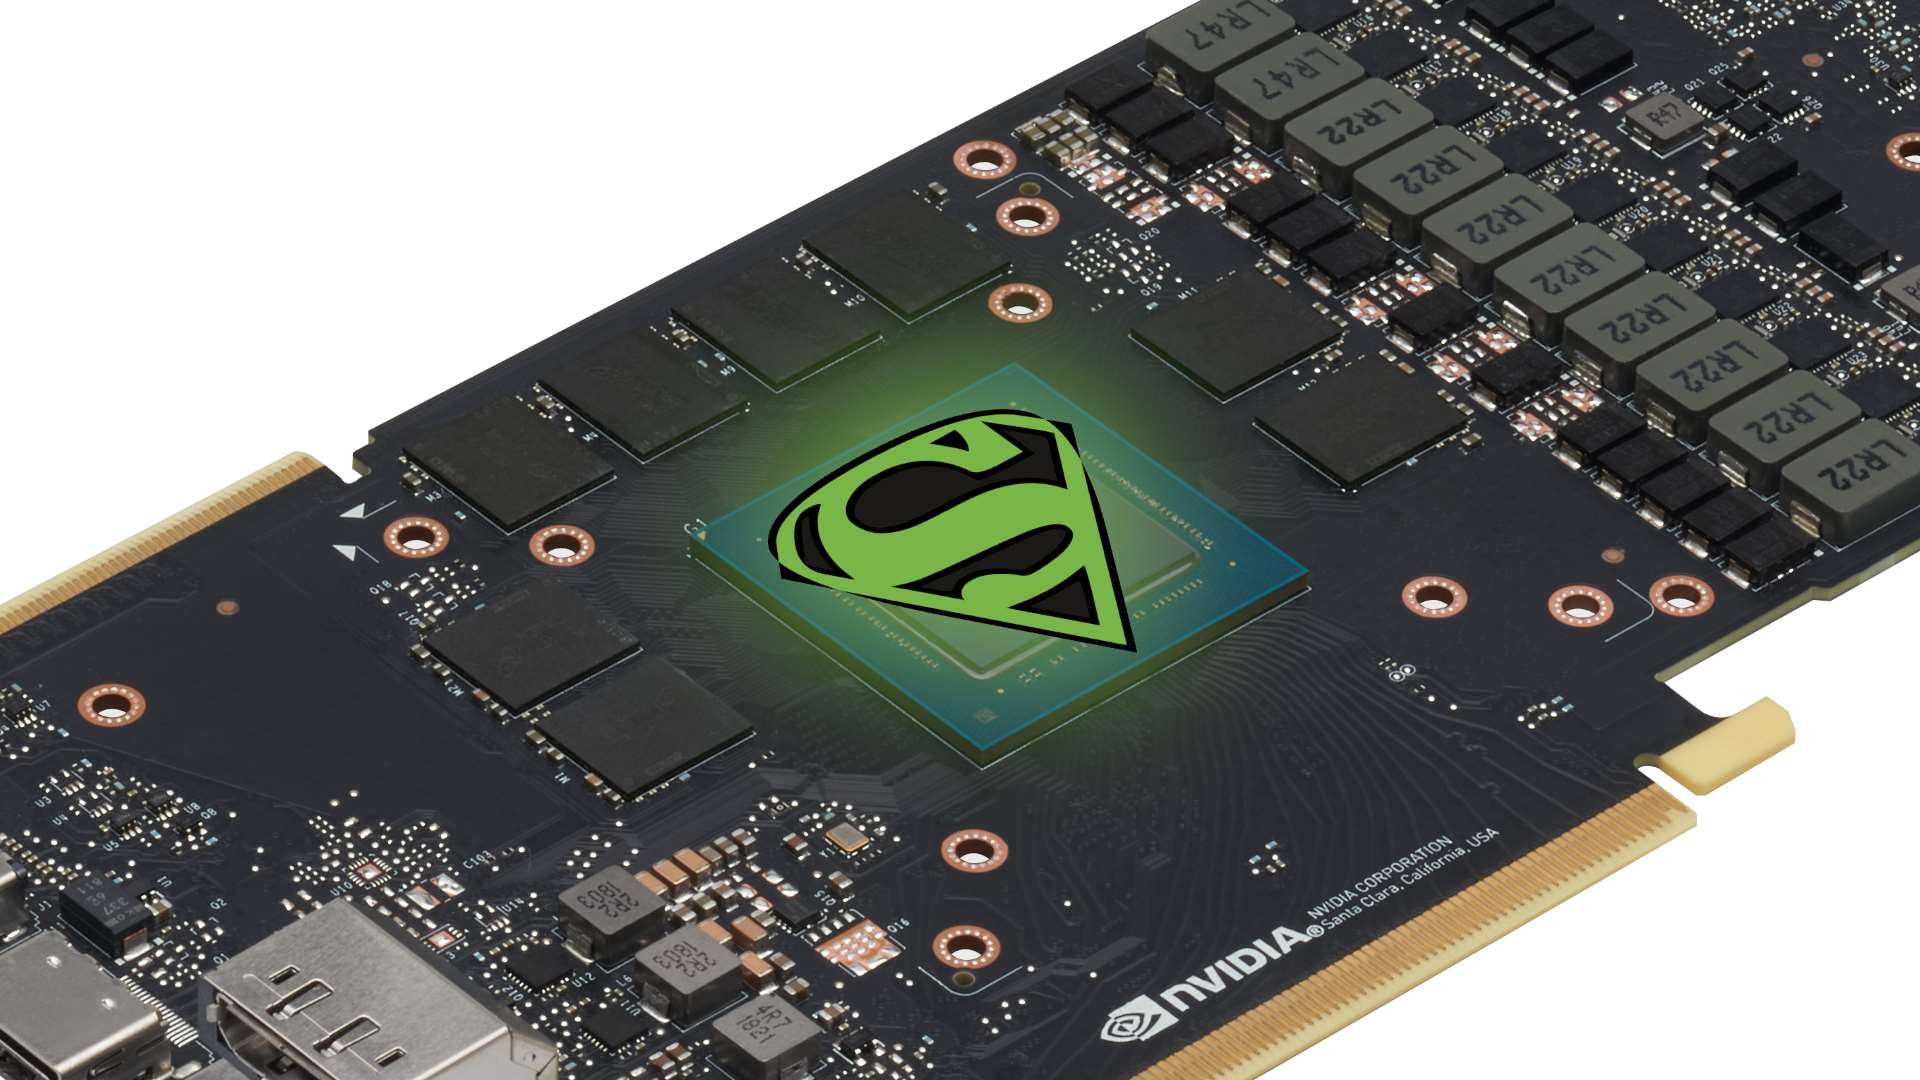 Leaked Nvidia 2080 Ti Super GPU turns out to be an RTX Tesla for GeForce Now